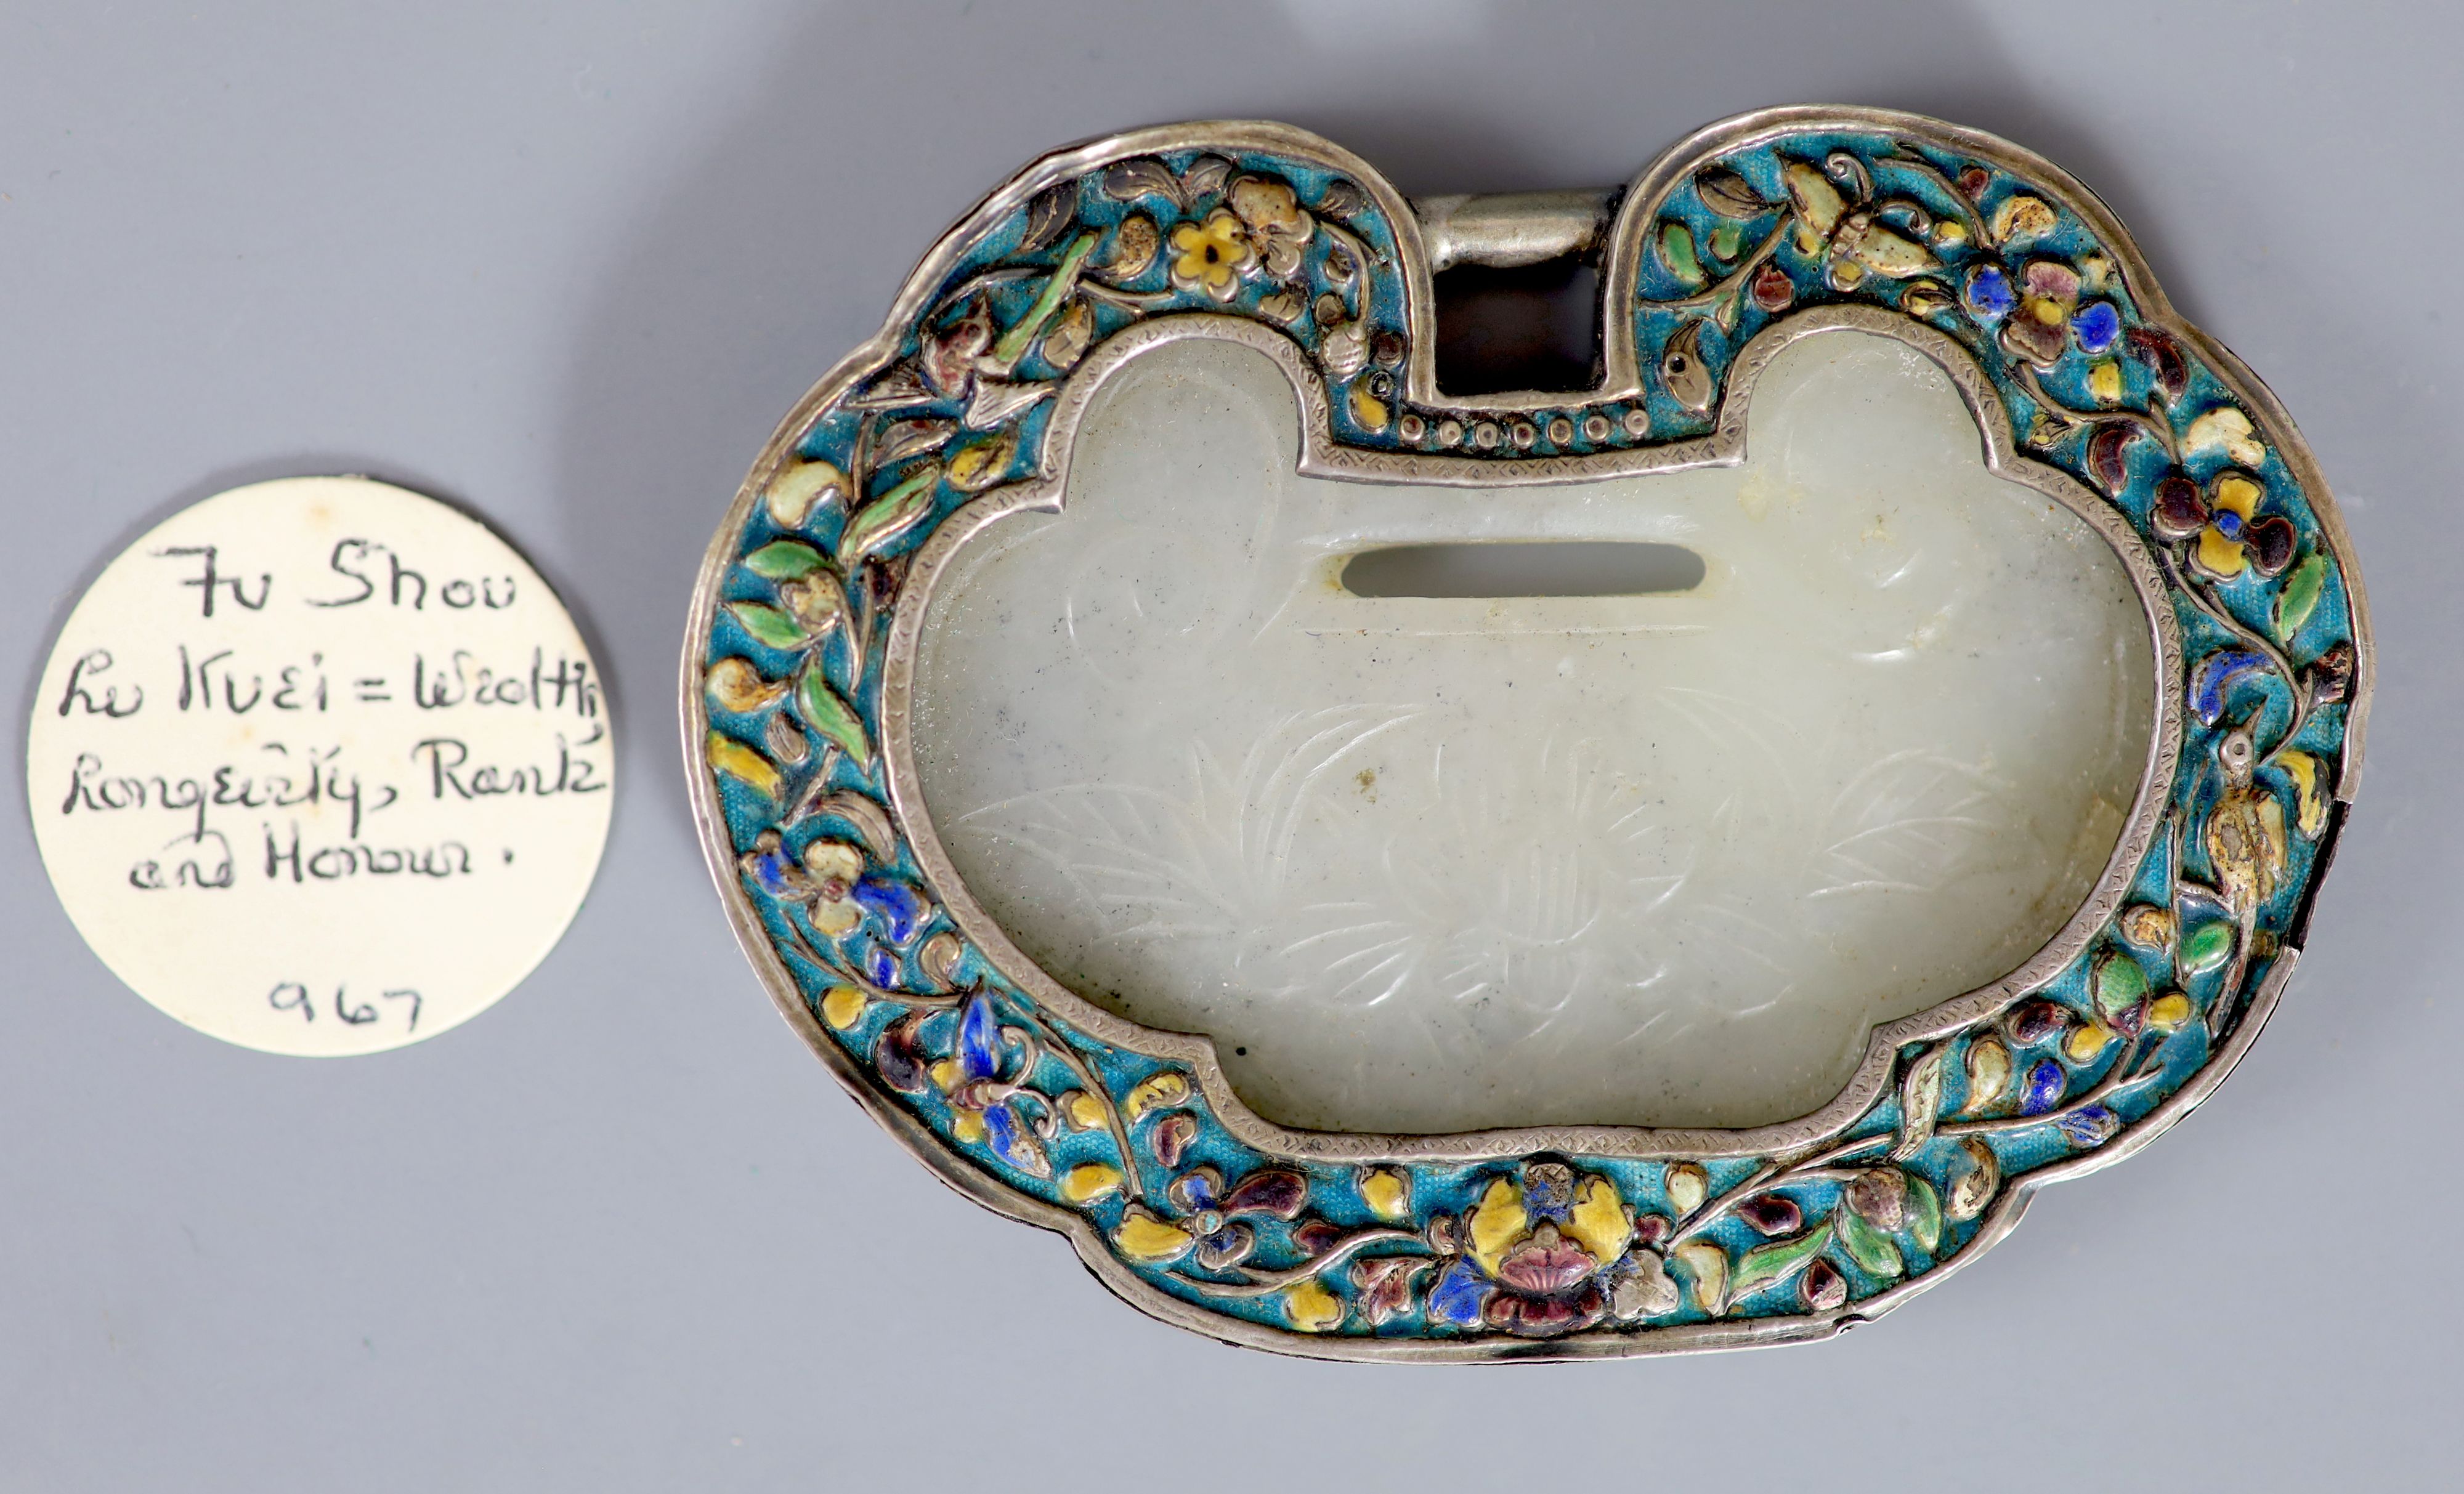 A Chinese silver and enamel mounted white jade spirit lock pendant, Provenance - A. T. Arber-Cooke